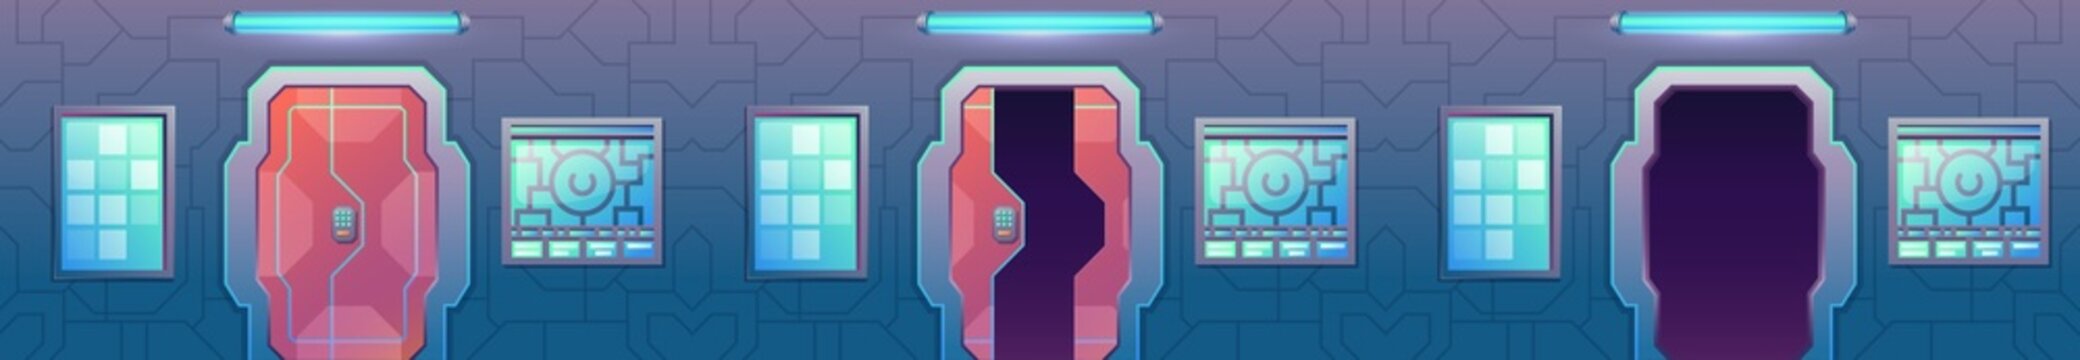 Spaceship sliding gate, futuristic laboratory door open animation. Closed spacecraft, shuttle metal entrance. Sci-fi game vector background